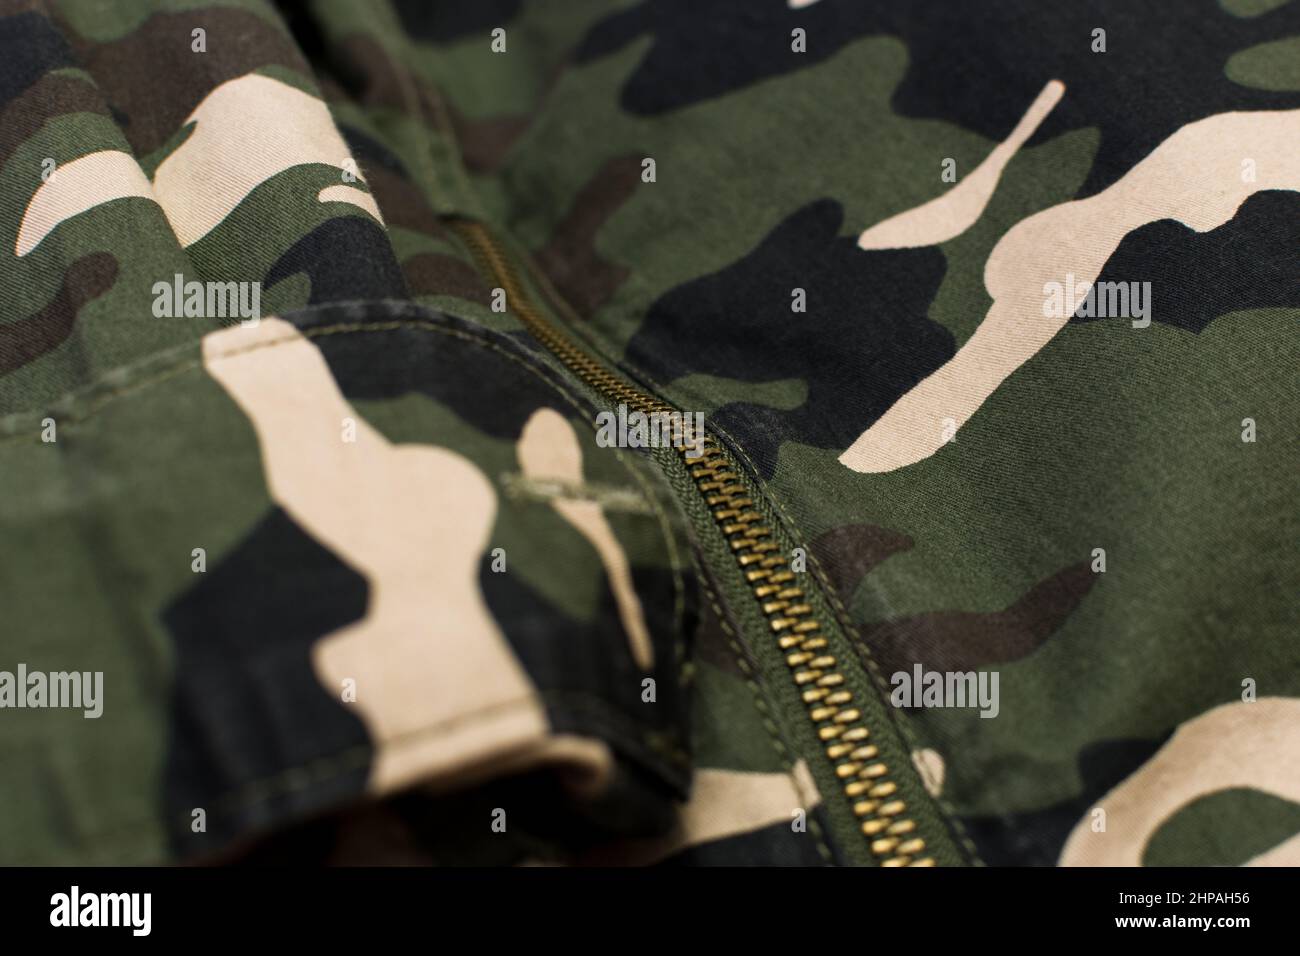 Military camouflage uniform with zipper, close up Stock Photo